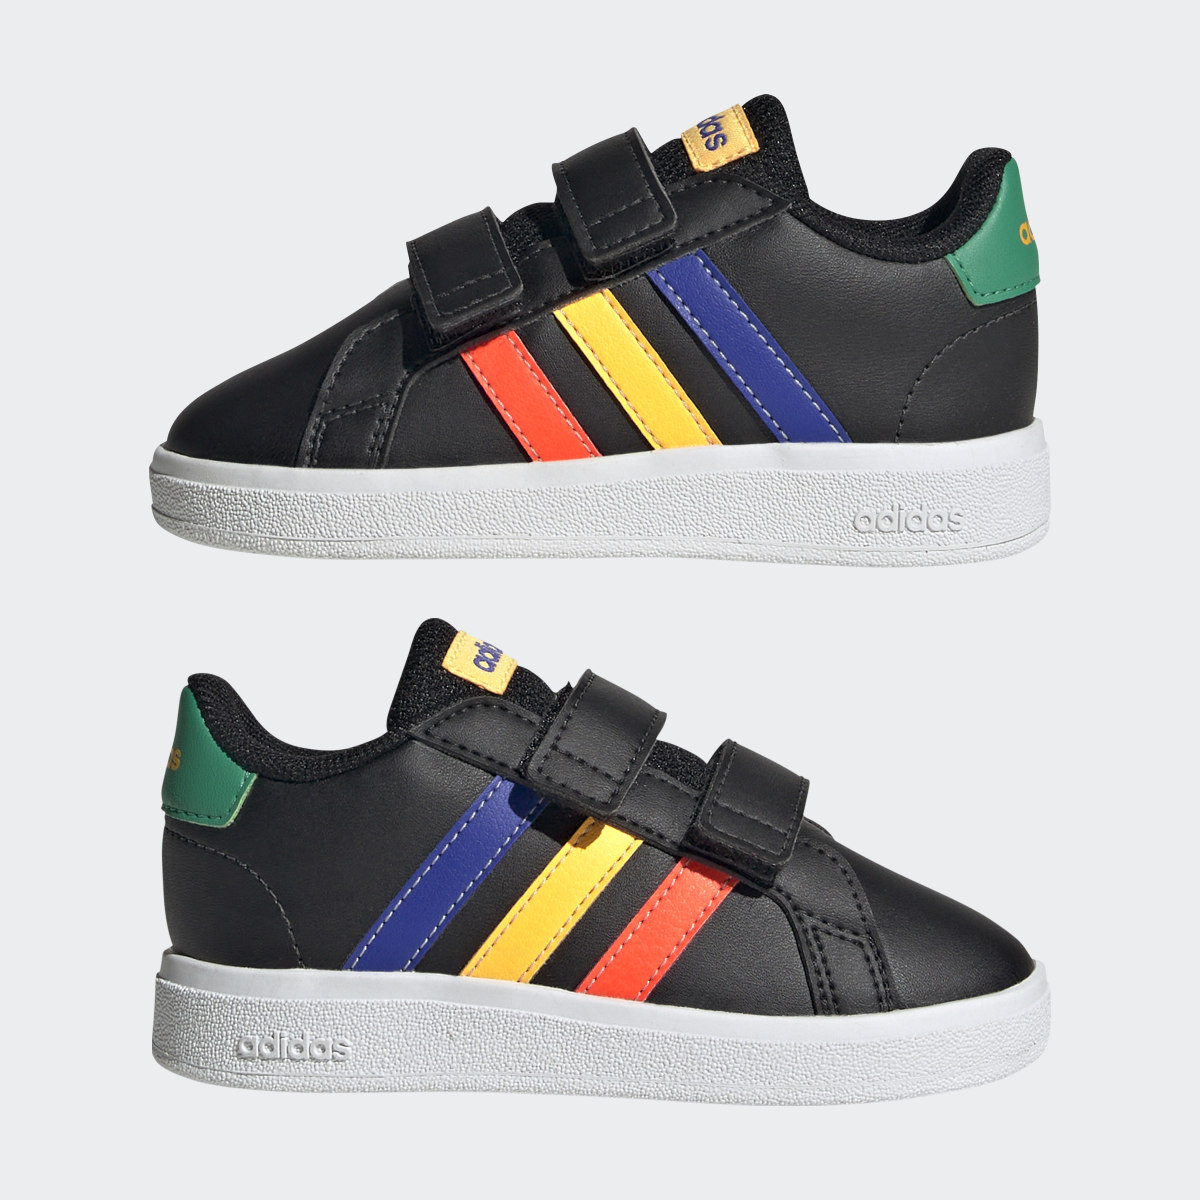 Adidas Grand Court Lifestyle Hook and Loop Shoes. 8